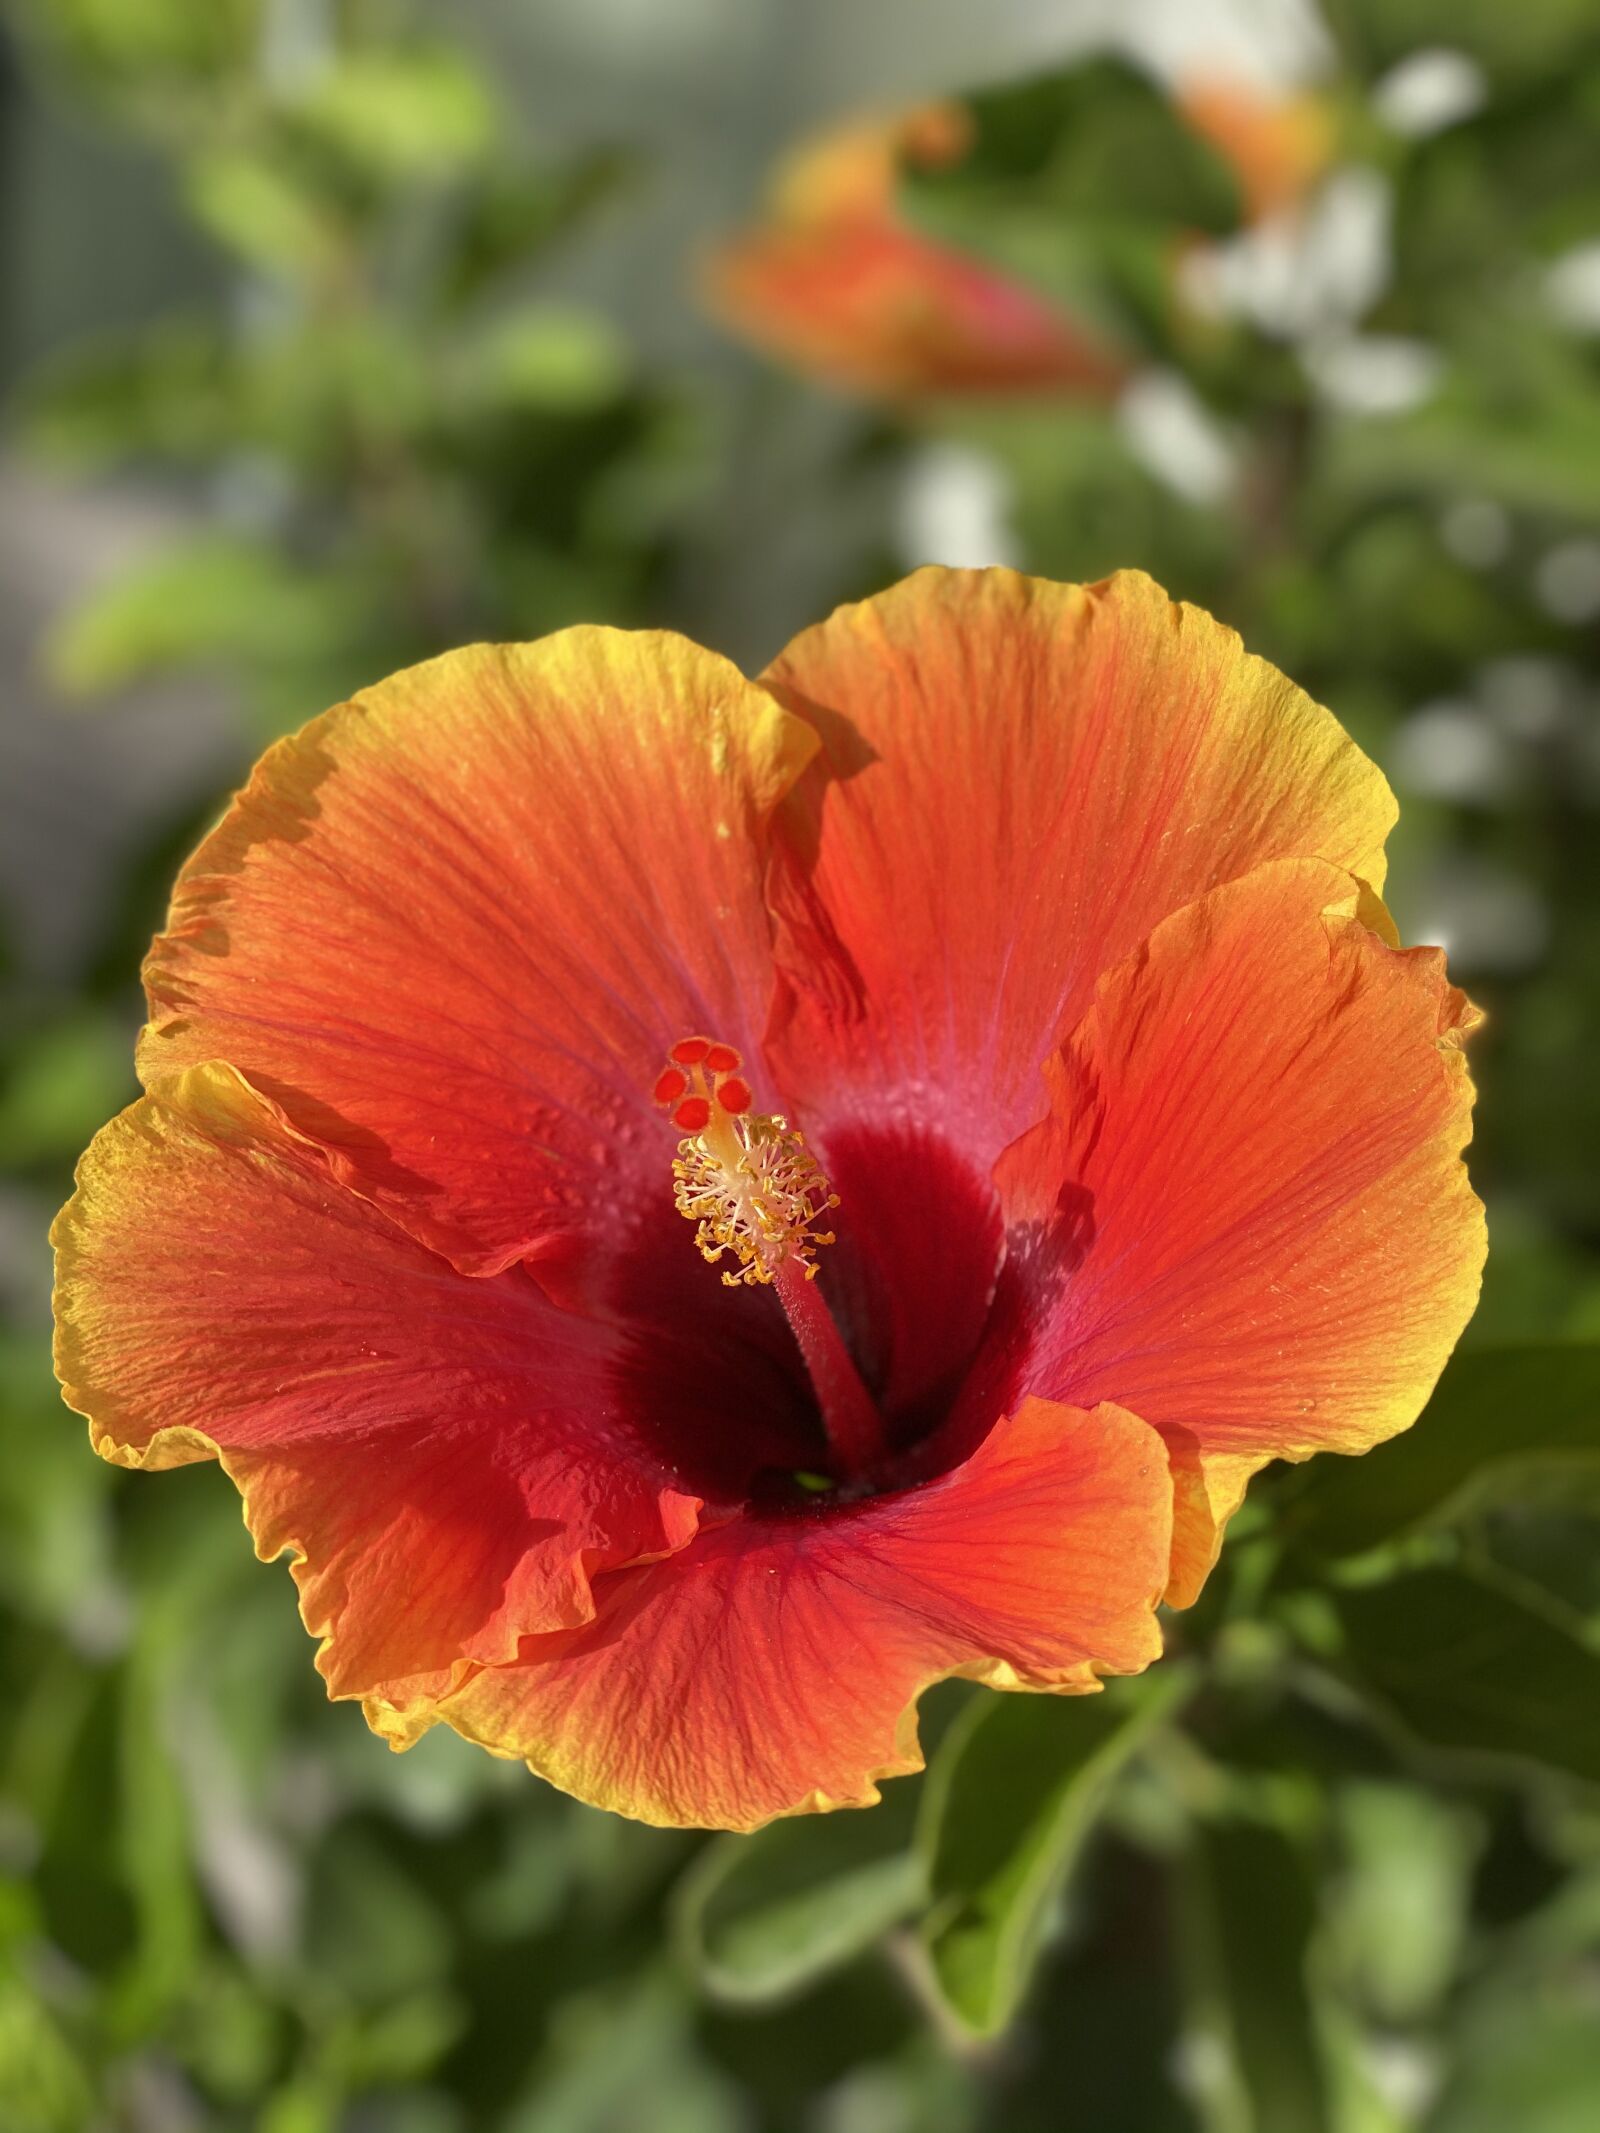 iPhone 11 Pro Max back dual camera 6mm f/2 sample photo. Flower, petals, hibiscus photography